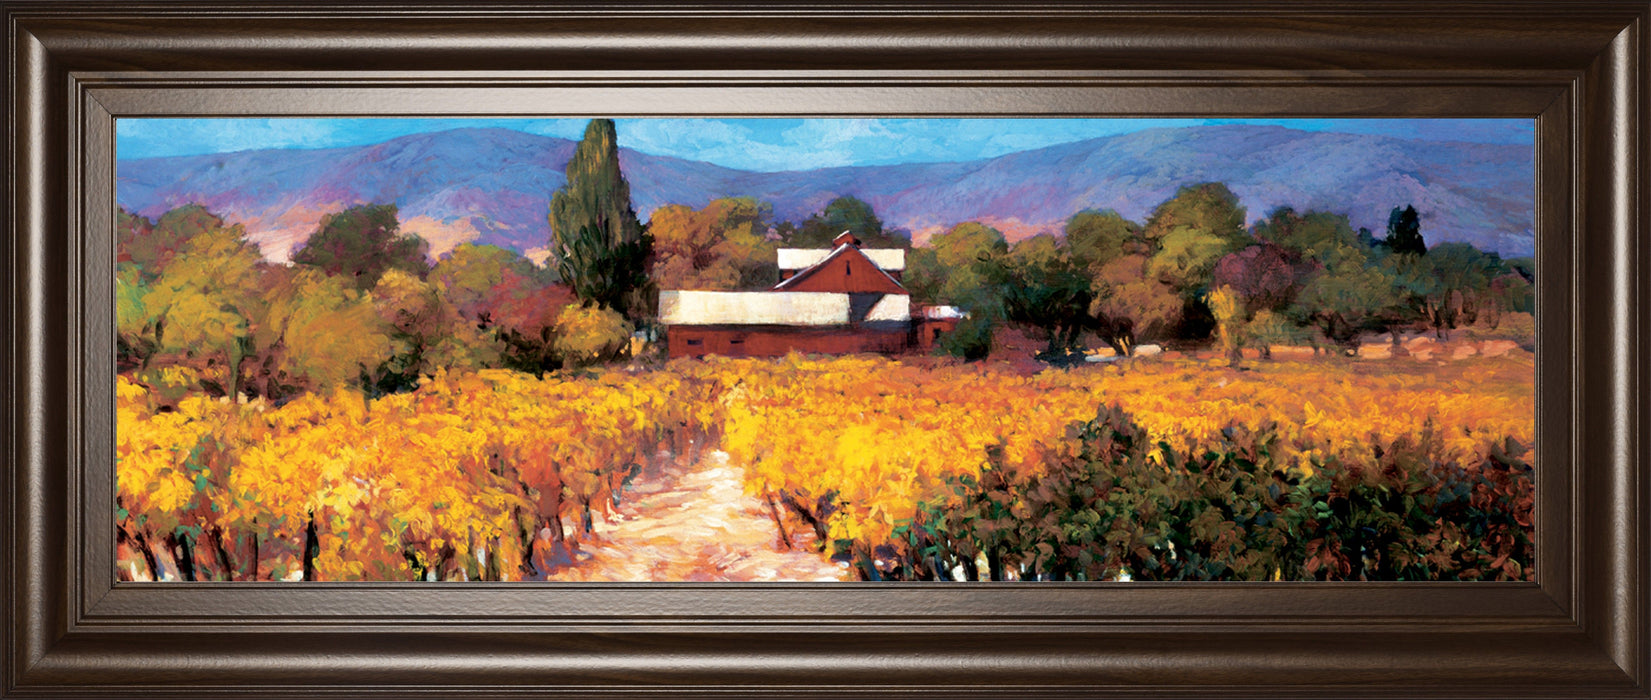 Vineyard Afternon By Craig P. - Yellow